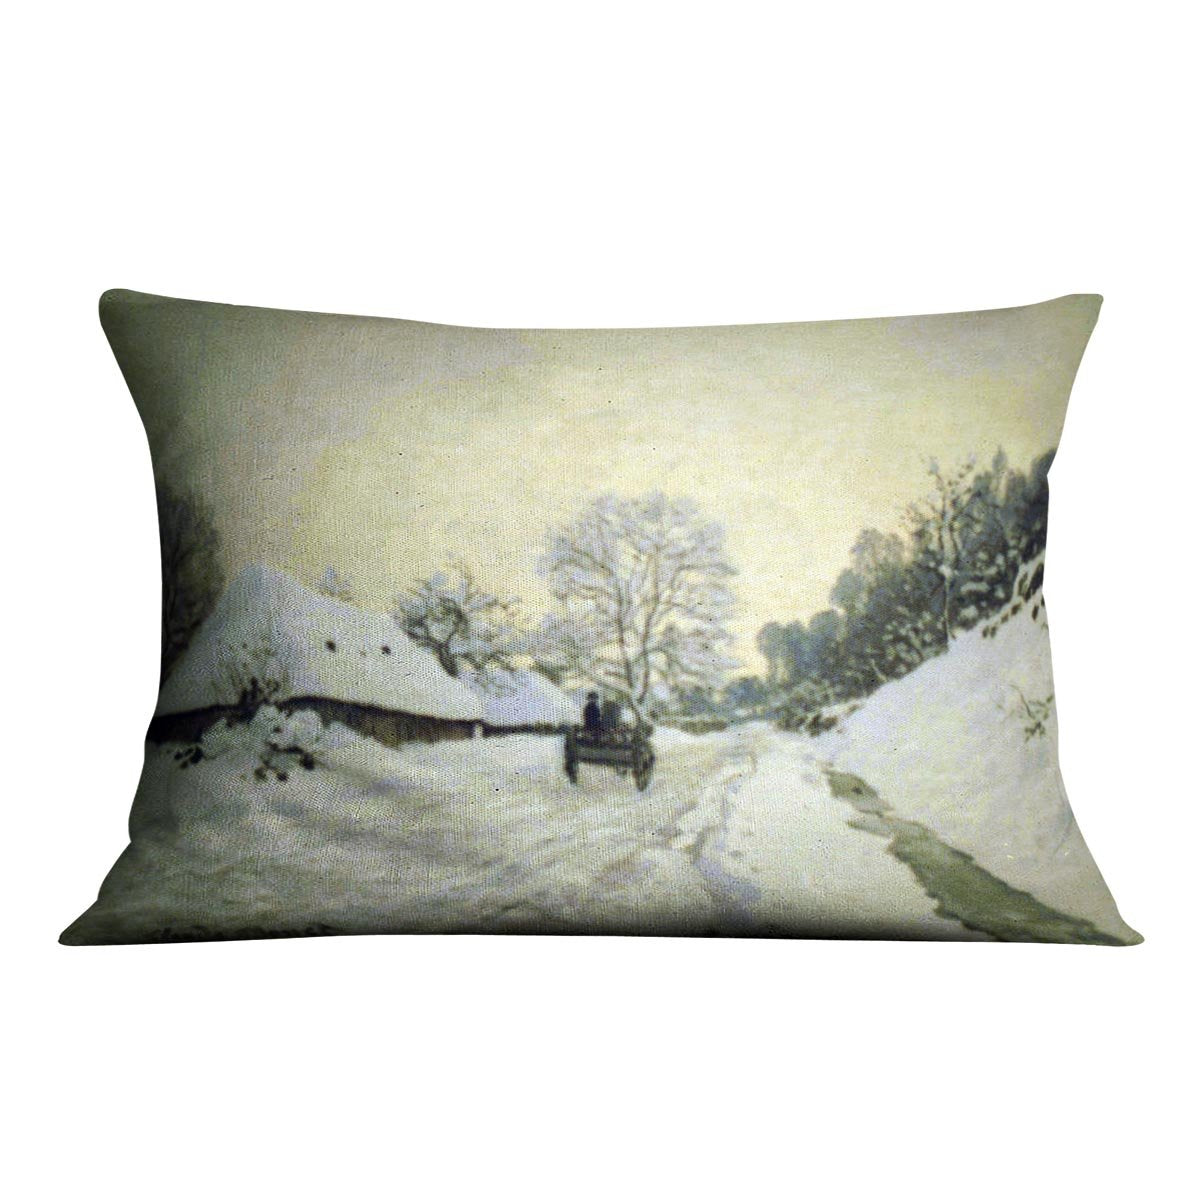 Orsay Brut By Manet Throw Pillow